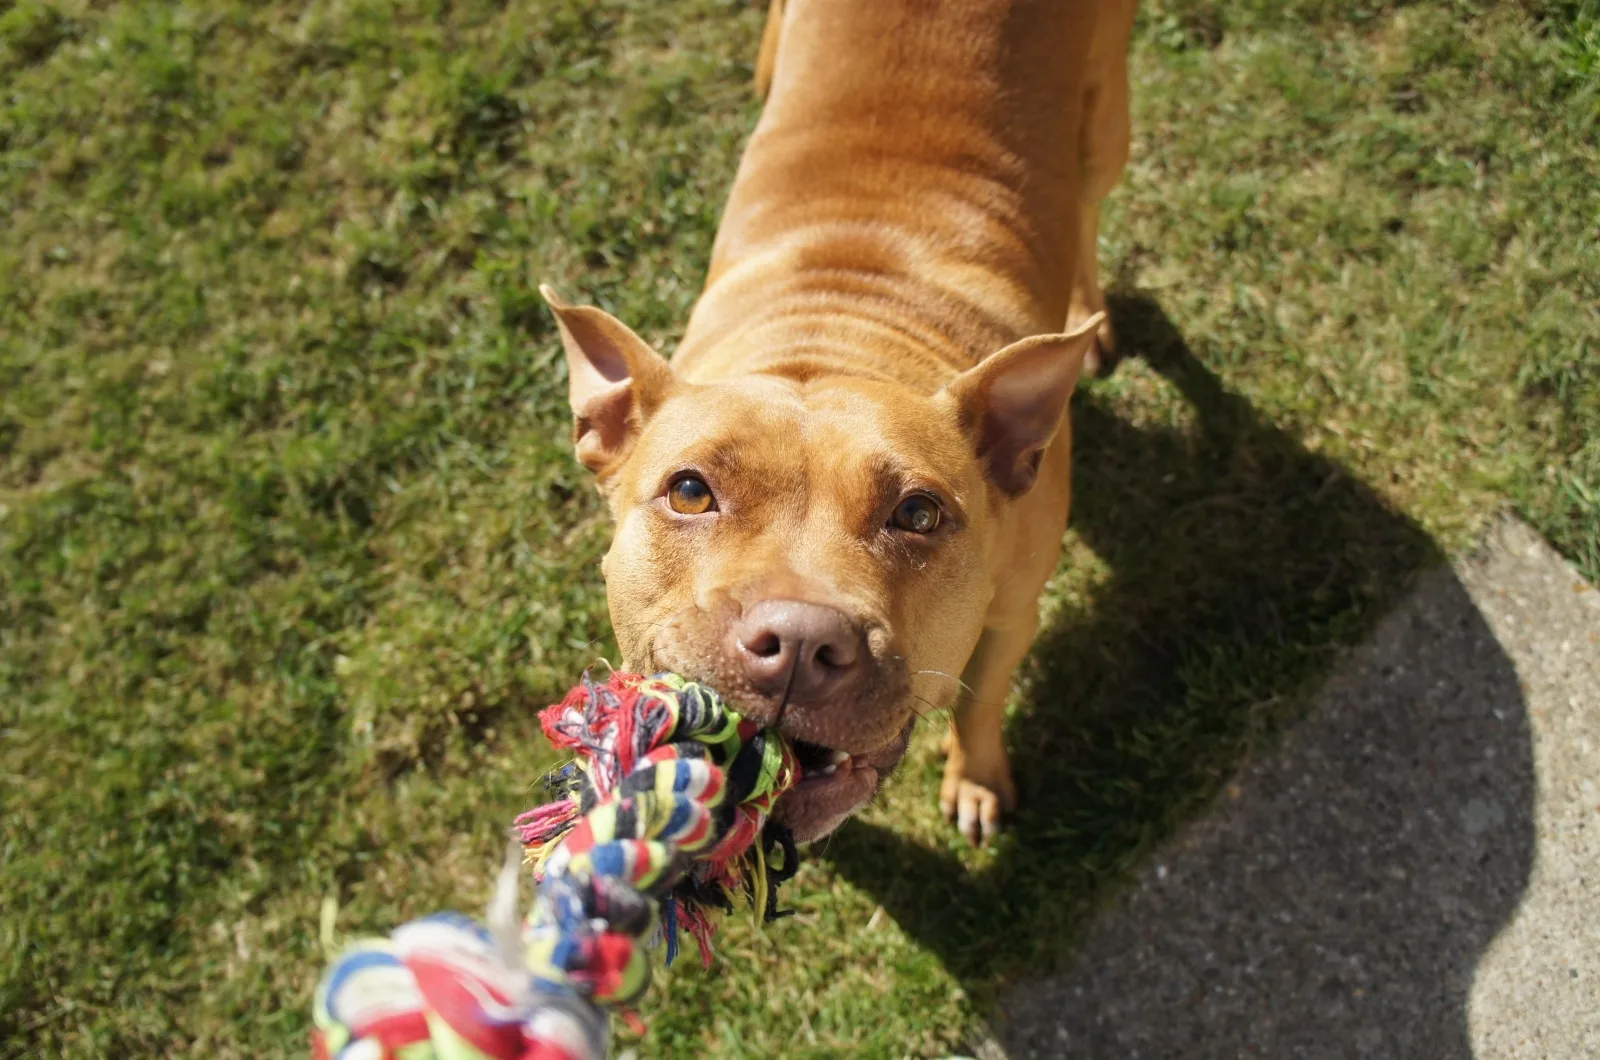 Pitbull playing with toy